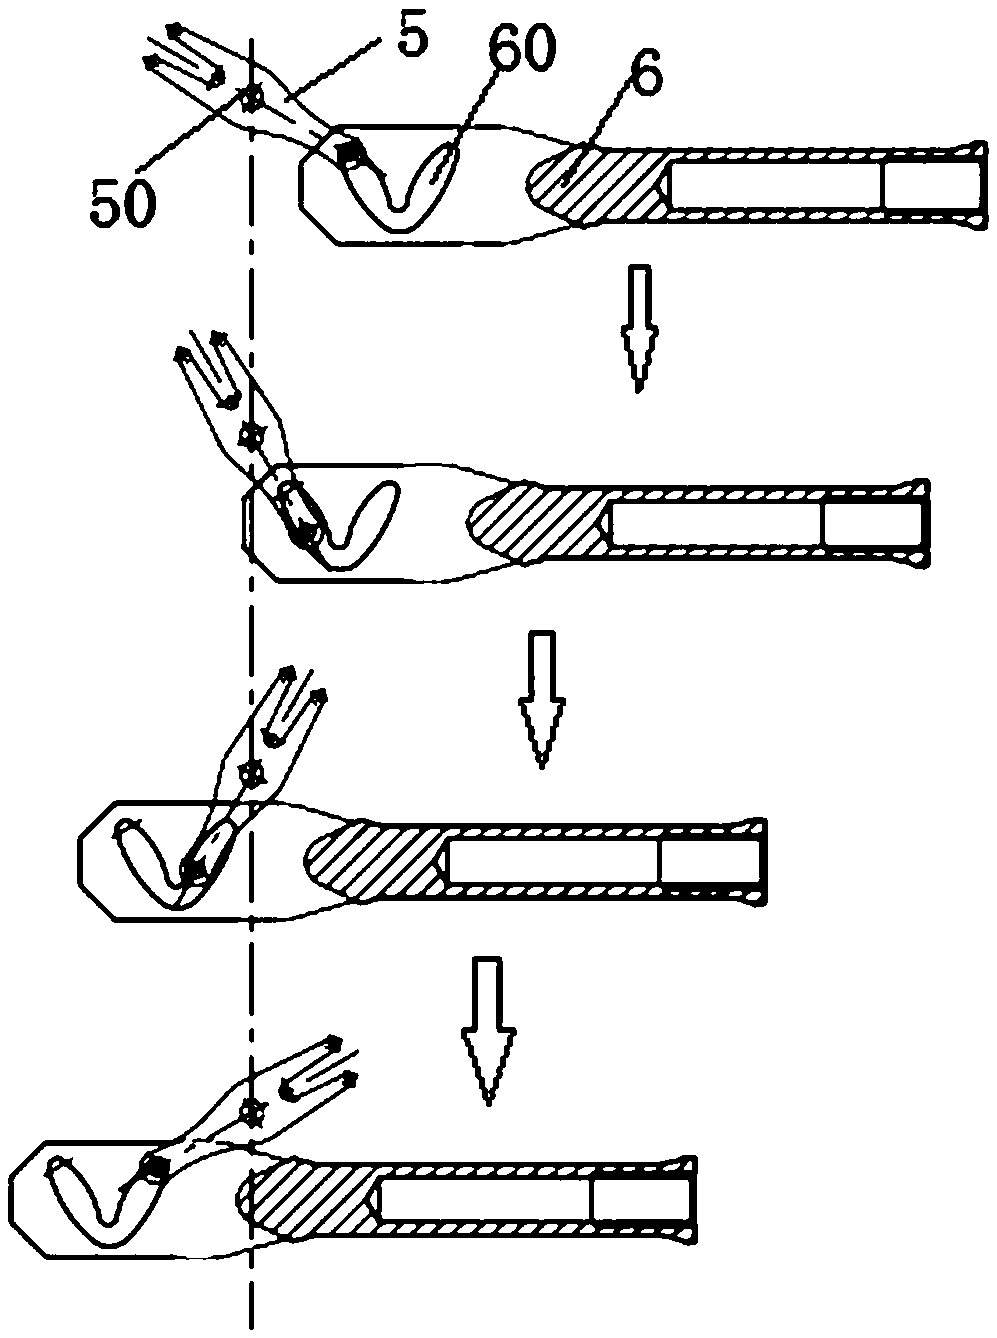 Circuit breaker and its arc extinguishing chamber and arcing contact assembly for arc extinguishing chamber, arcing contact driving rod